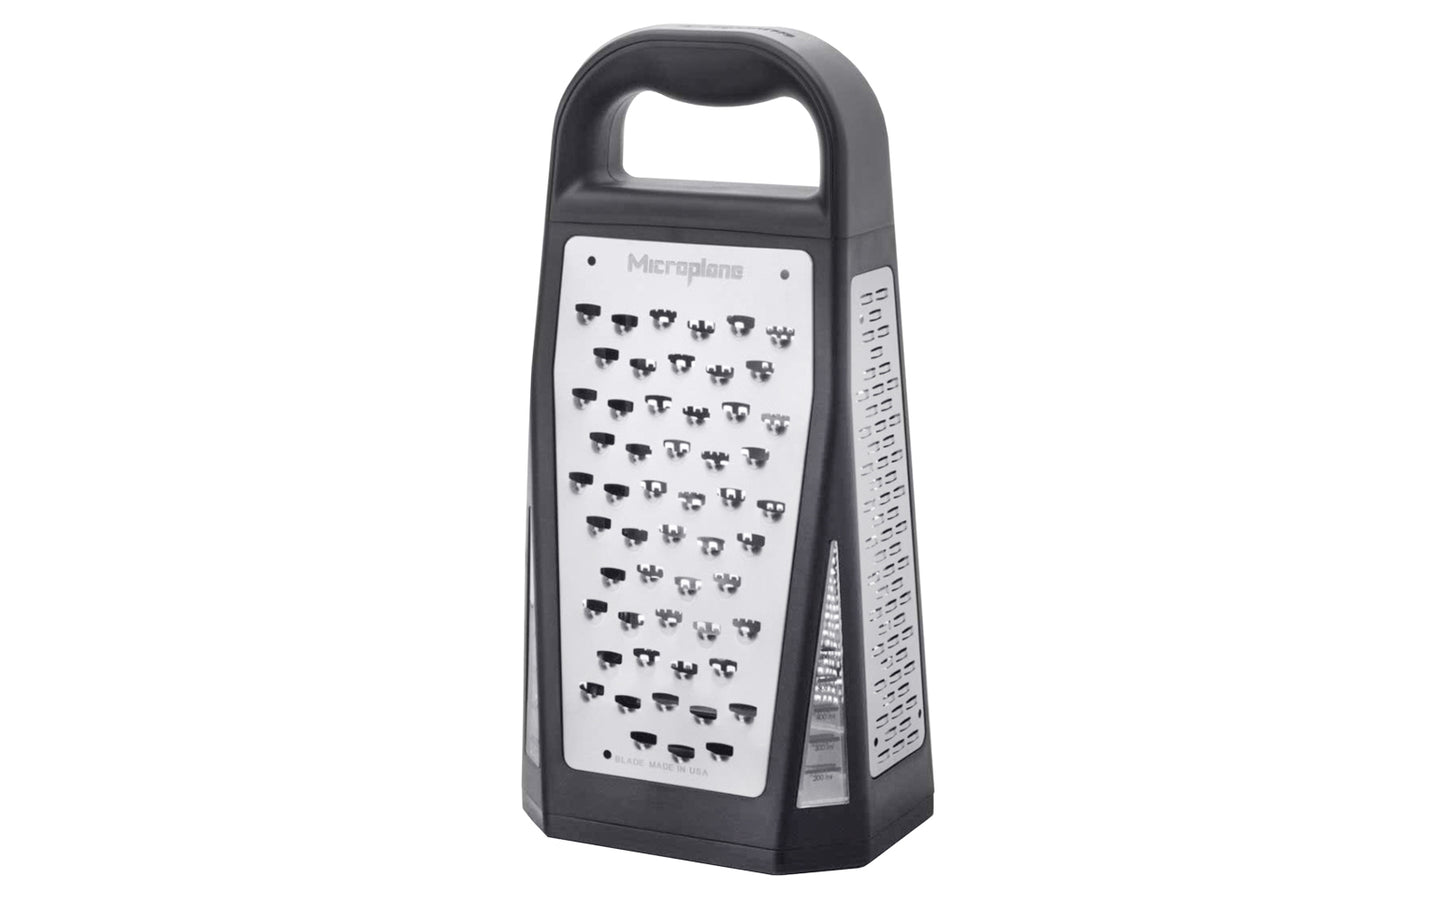 Made in USA - Blades made in USA - Elite Five Blade Grater - Microplane blade styles: Fine, Coarse, Ribbon, Ultra Coarse, Shaver - Box Grater - Model 34009 - Slicing - Grating - Shaving - 5 Blade Grater - Box Grater - 098399340098 - Non-slip hand grip - Dishwasher safe - Razor-sharp blades made from stainless steel